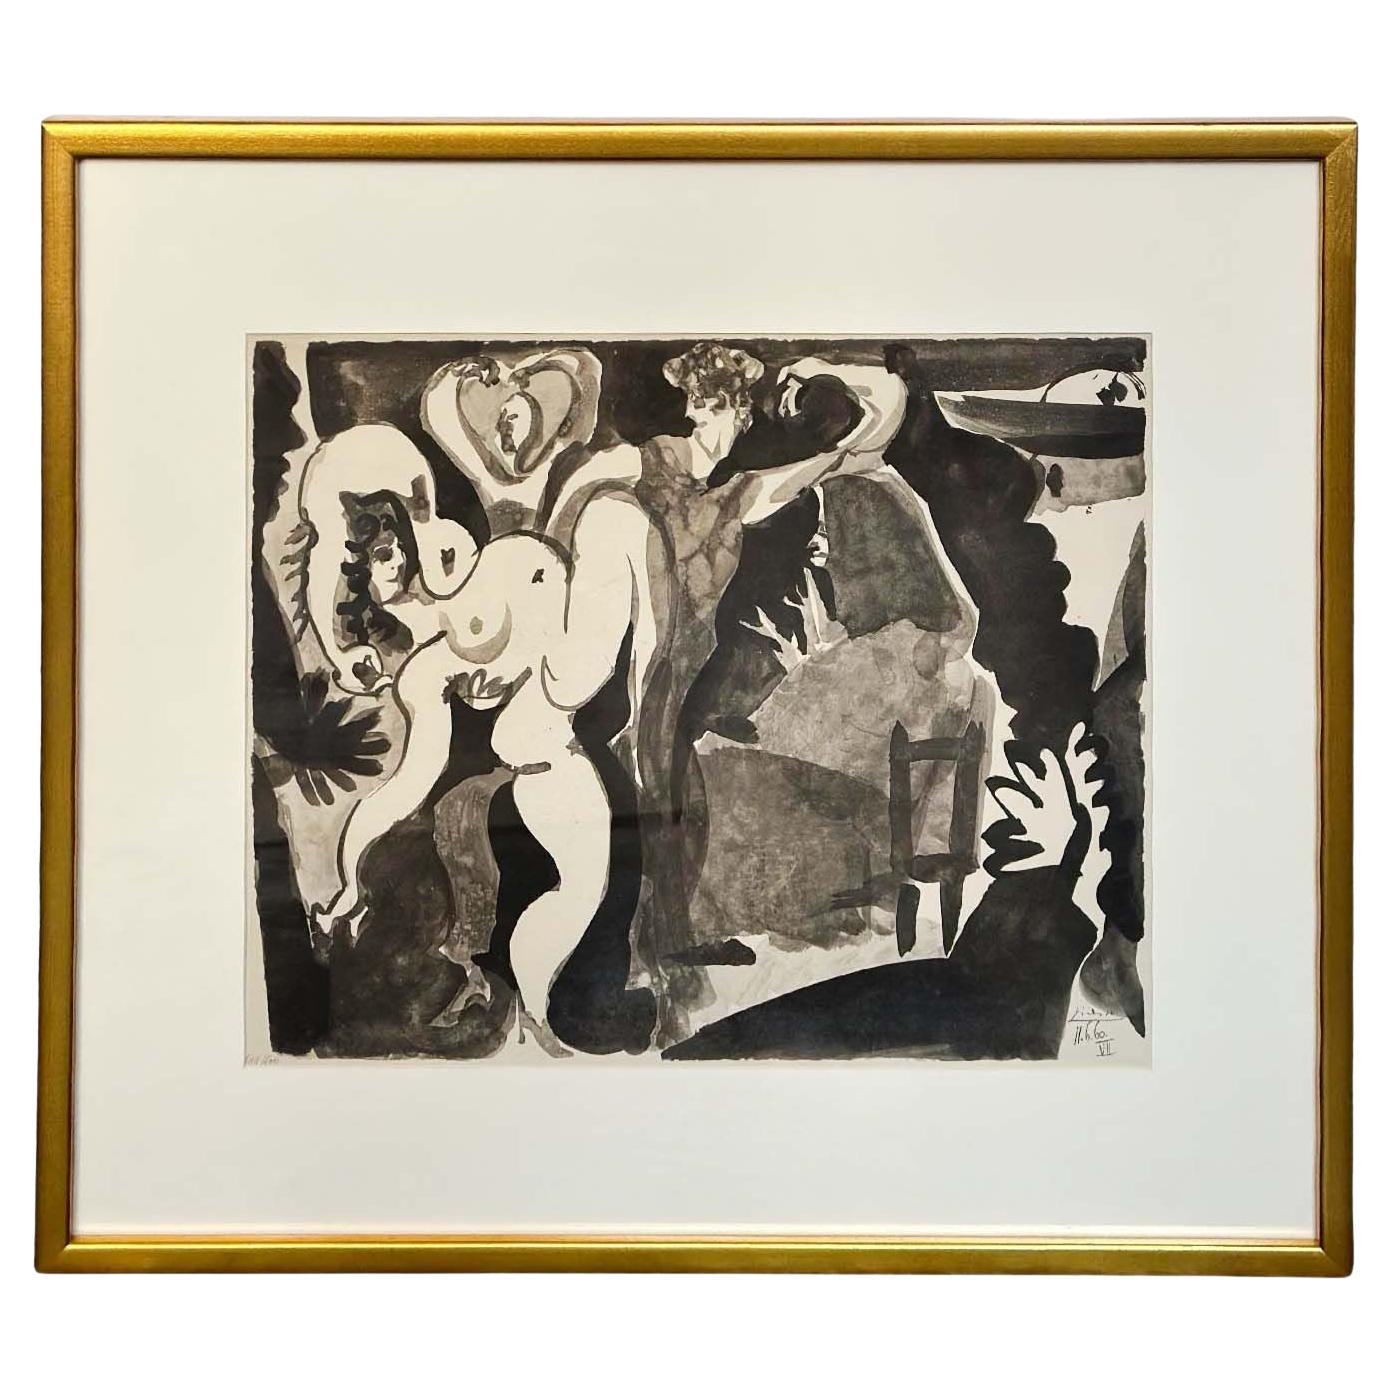 Pablo Picasso "Dancing Woman" Lithograph, 1960 For Sale